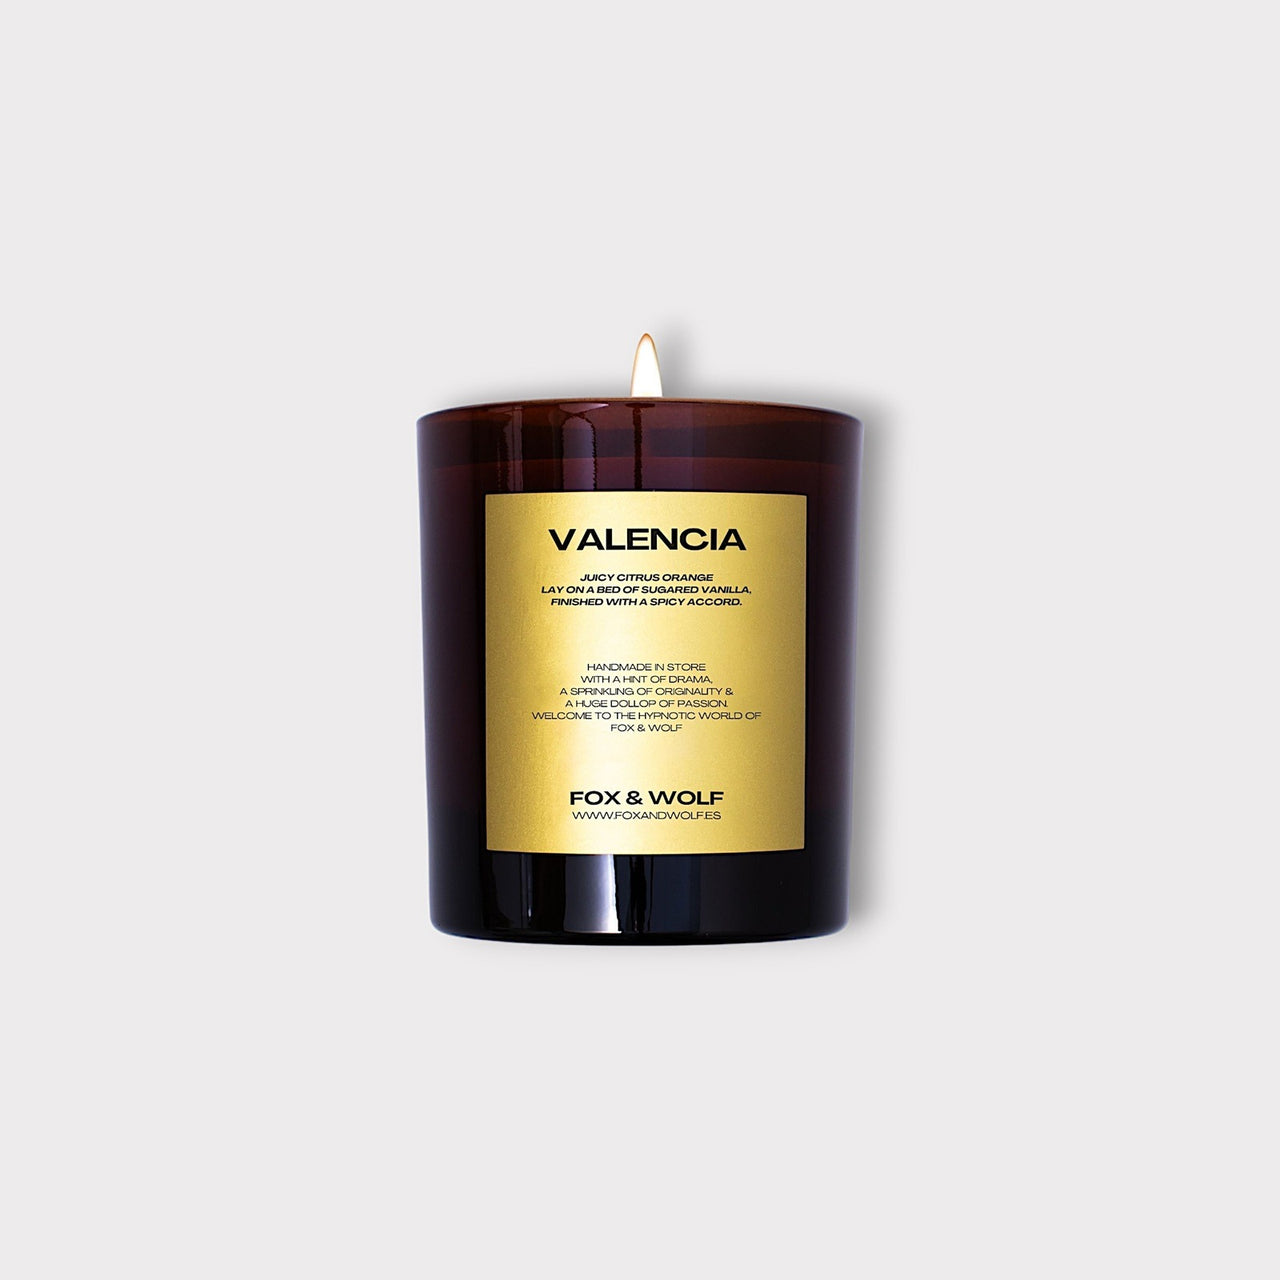 300 G VALENCIA SCENTED CANDLE